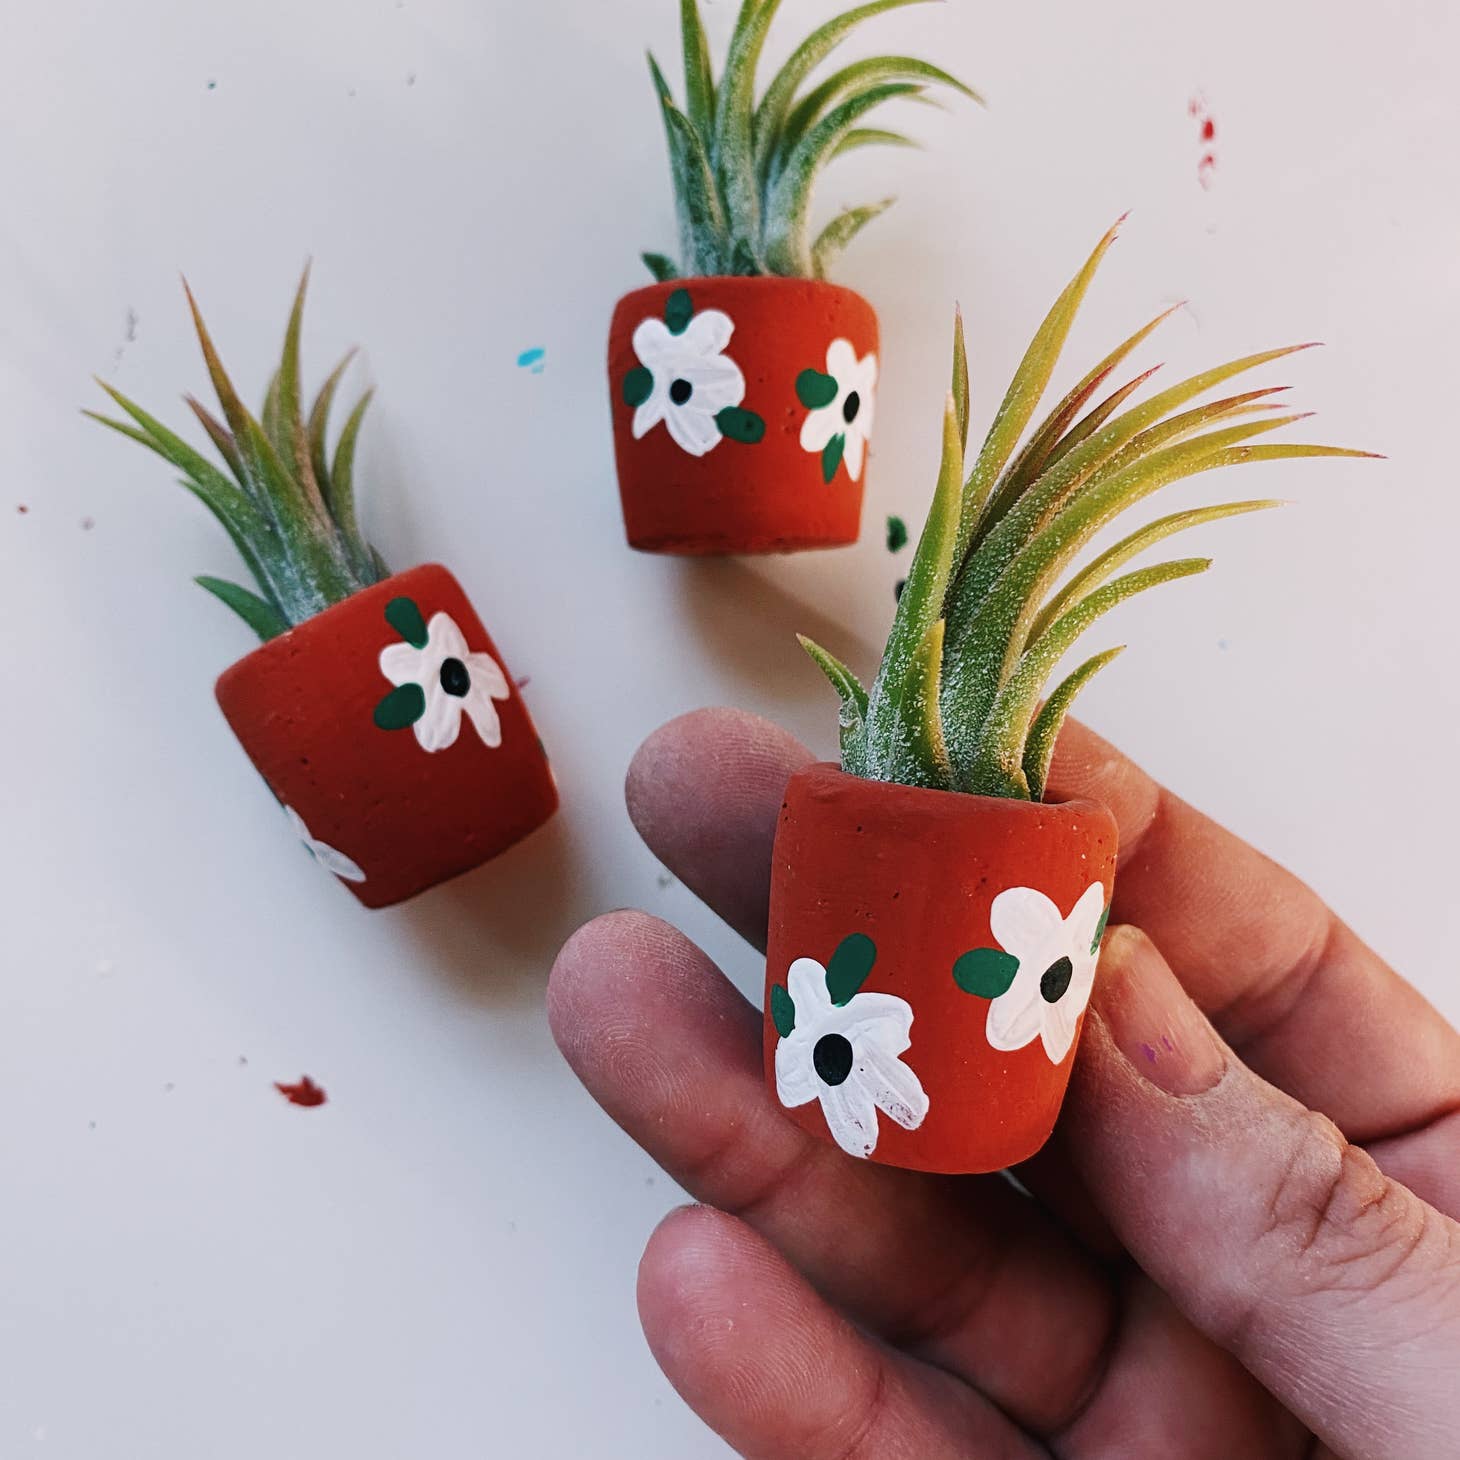 A cute, handmade mini planter made for air plants or succulents.   - handmade with concrete & hand painted. Includes airplant. o'berrys succulents